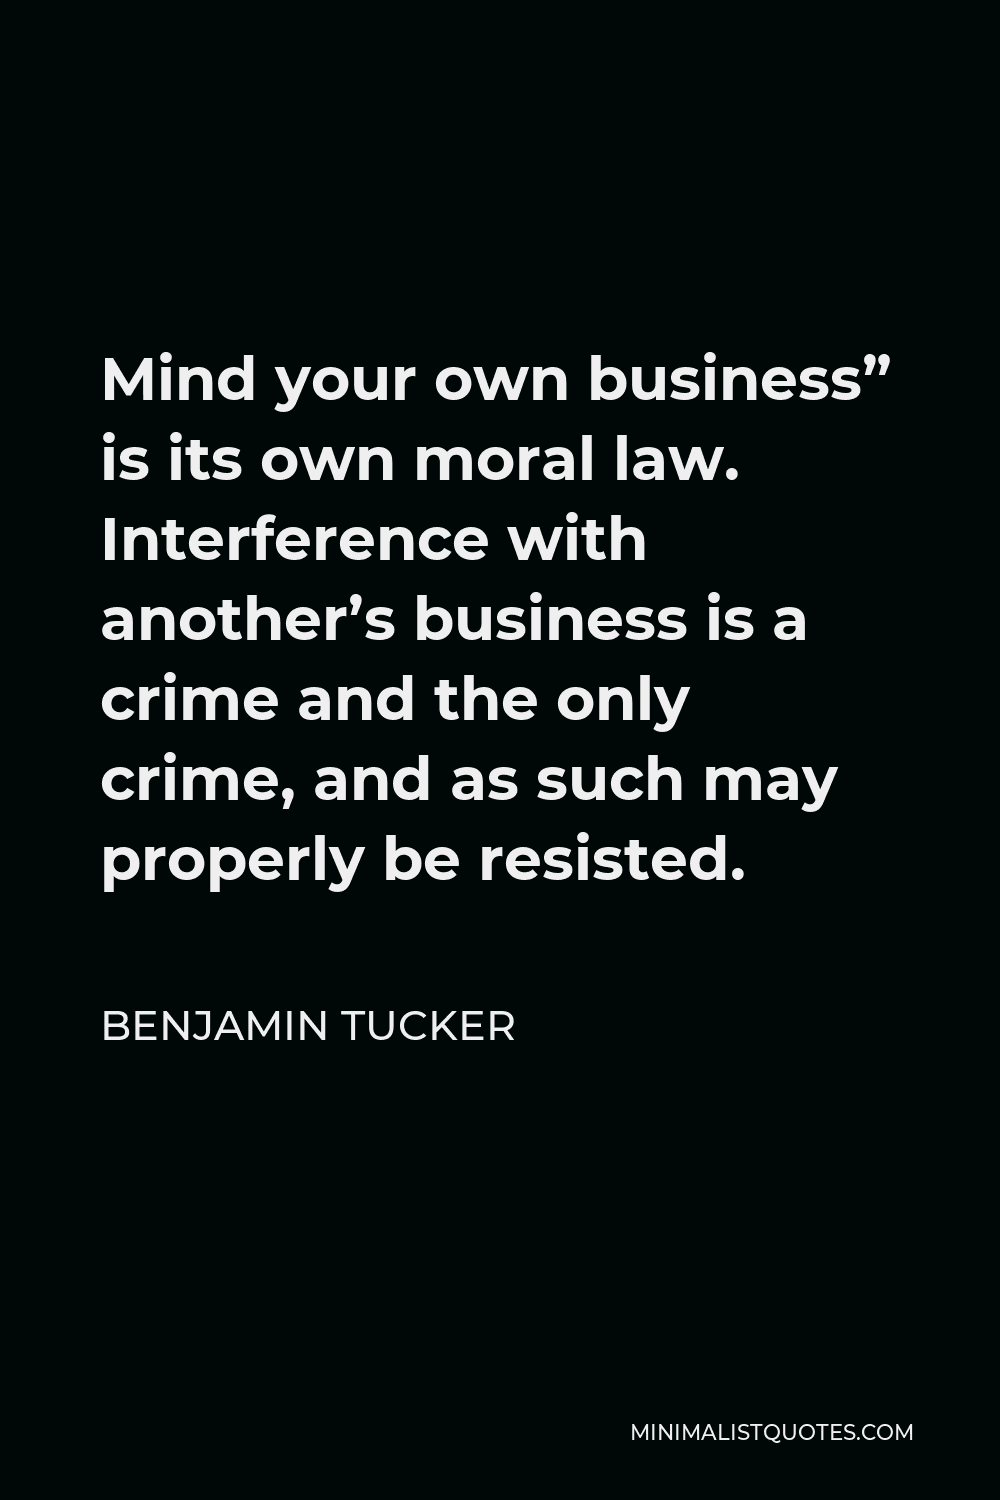 Benjamin Tucker Quote - Mind your own business” is its own moral law. Interference with another’s business is a crime and the only crime, and as such may properly be resisted.